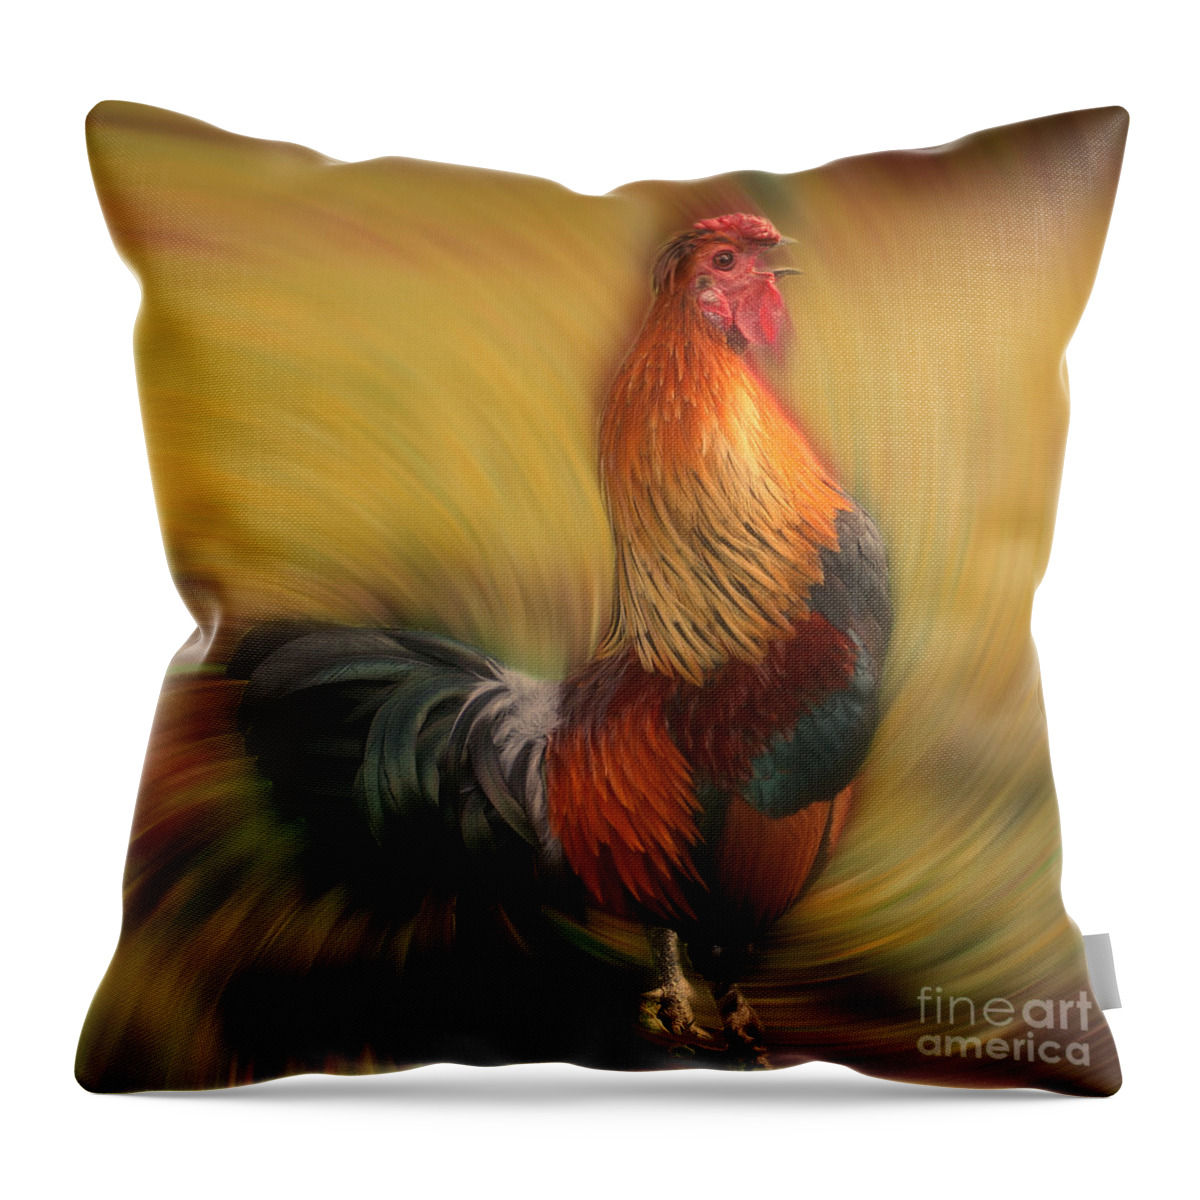 Rooster Throw Pillow featuring the photograph Crowing Rooster by Smilin Eyes Treasures